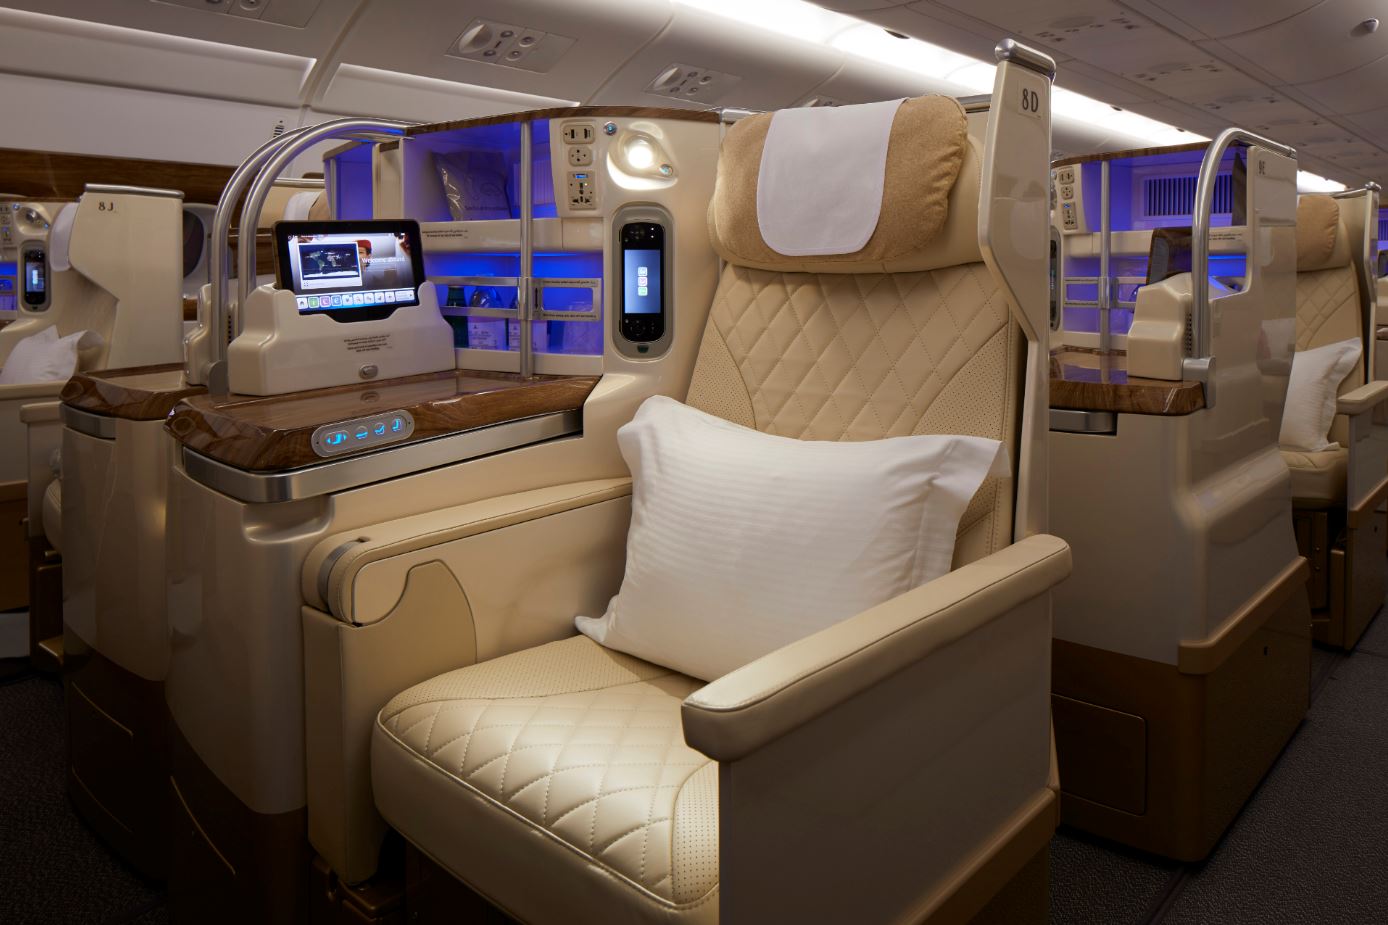 Emirates new business class. How Emirates is taking its A380 luxury to new heights